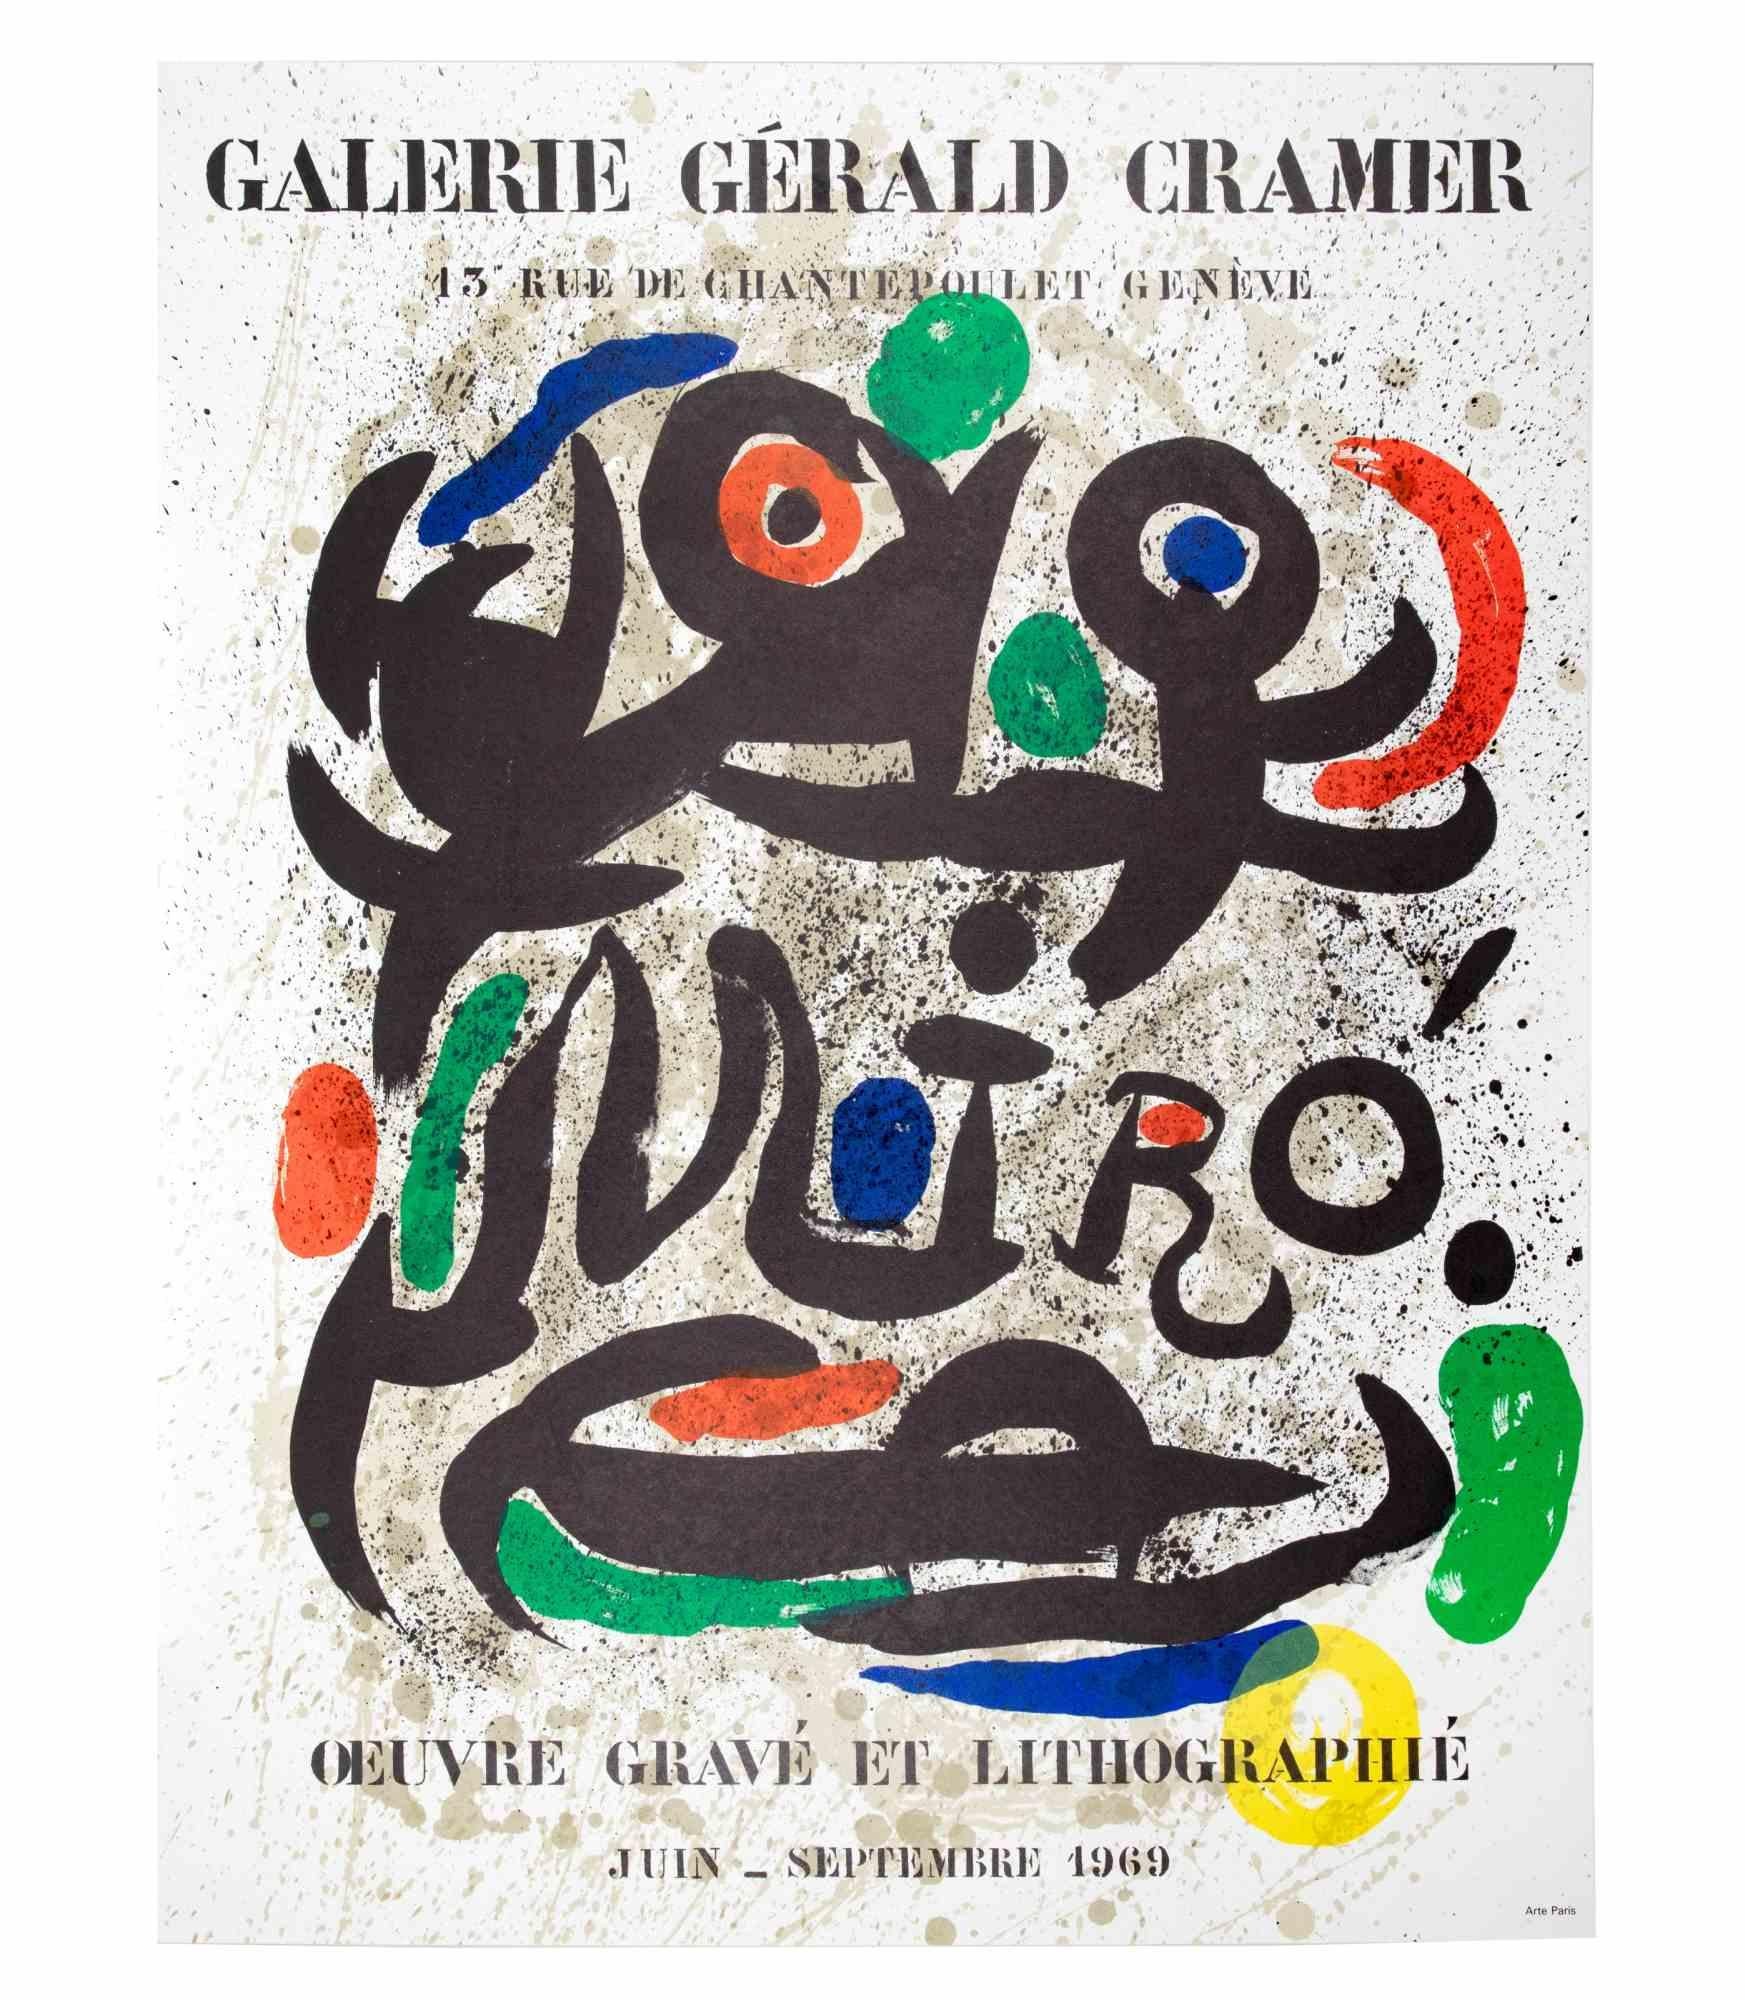 Joan Miró Print - Exhibition Poster Galerie Gerald Cramer - Lithograph by Joan Mirò - 1969